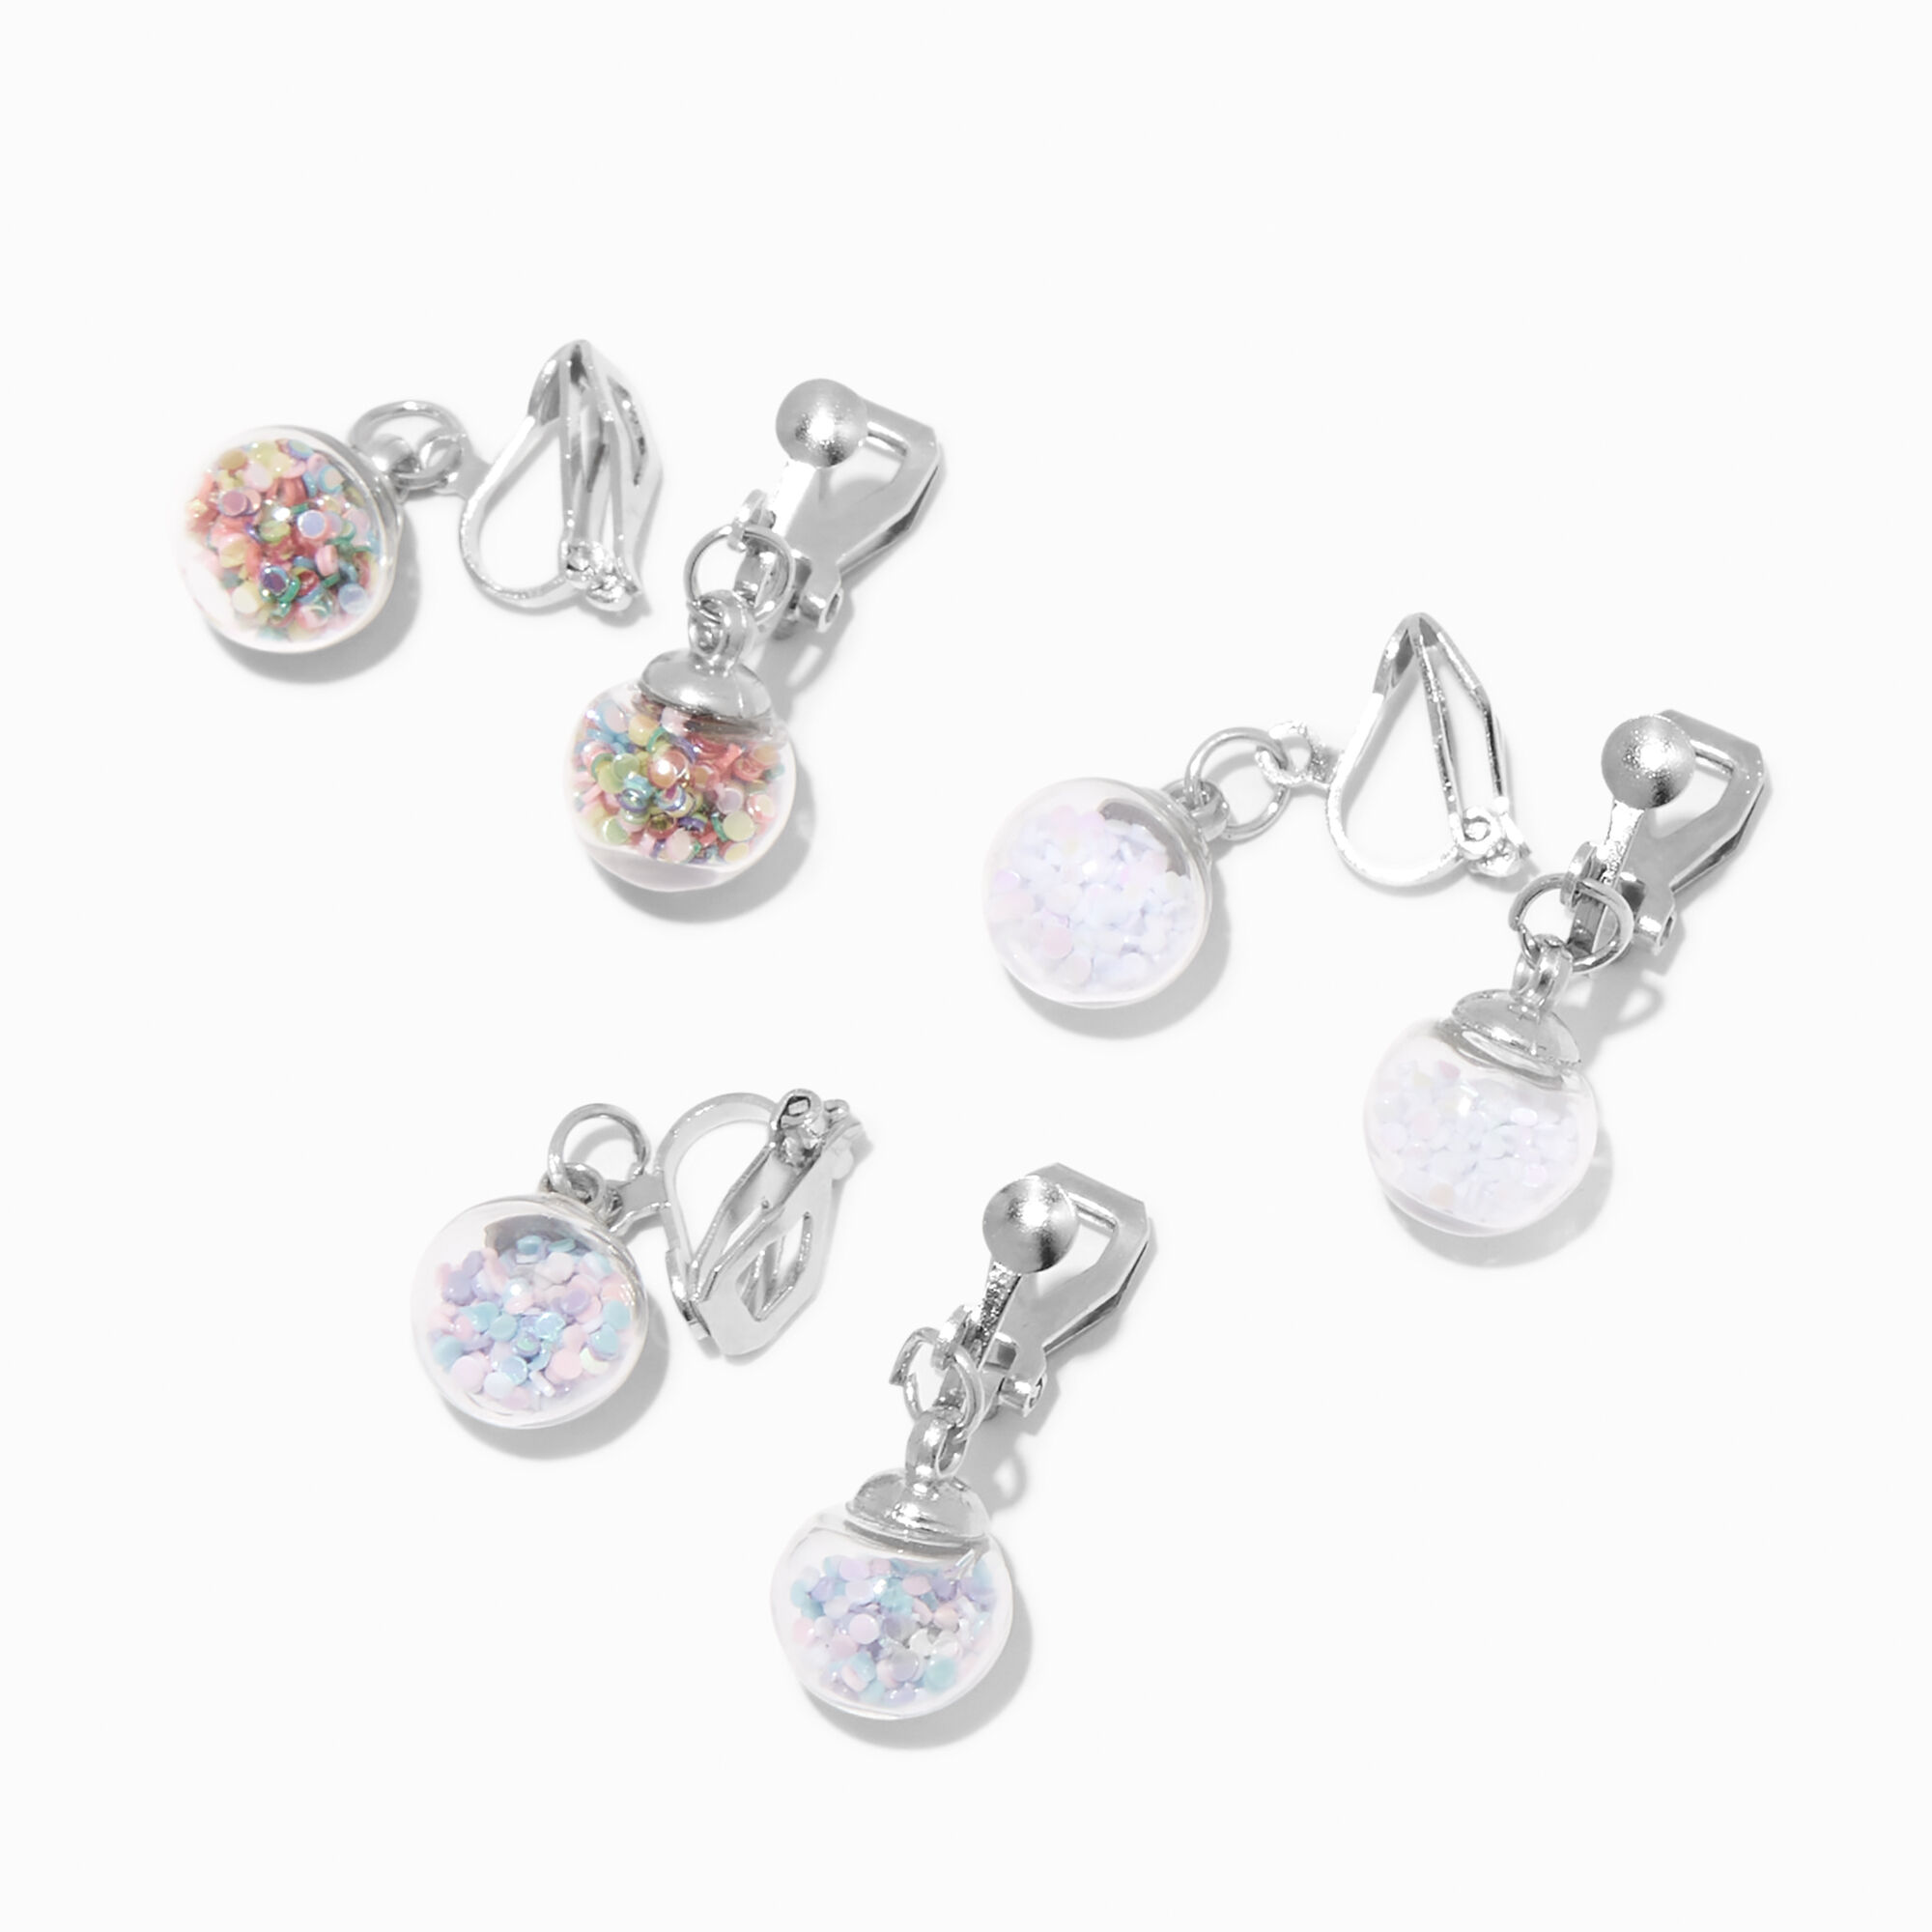 View Claires Tone 05 Glitter Shaker Clip On Drop Earrings 3 Pack Silver information